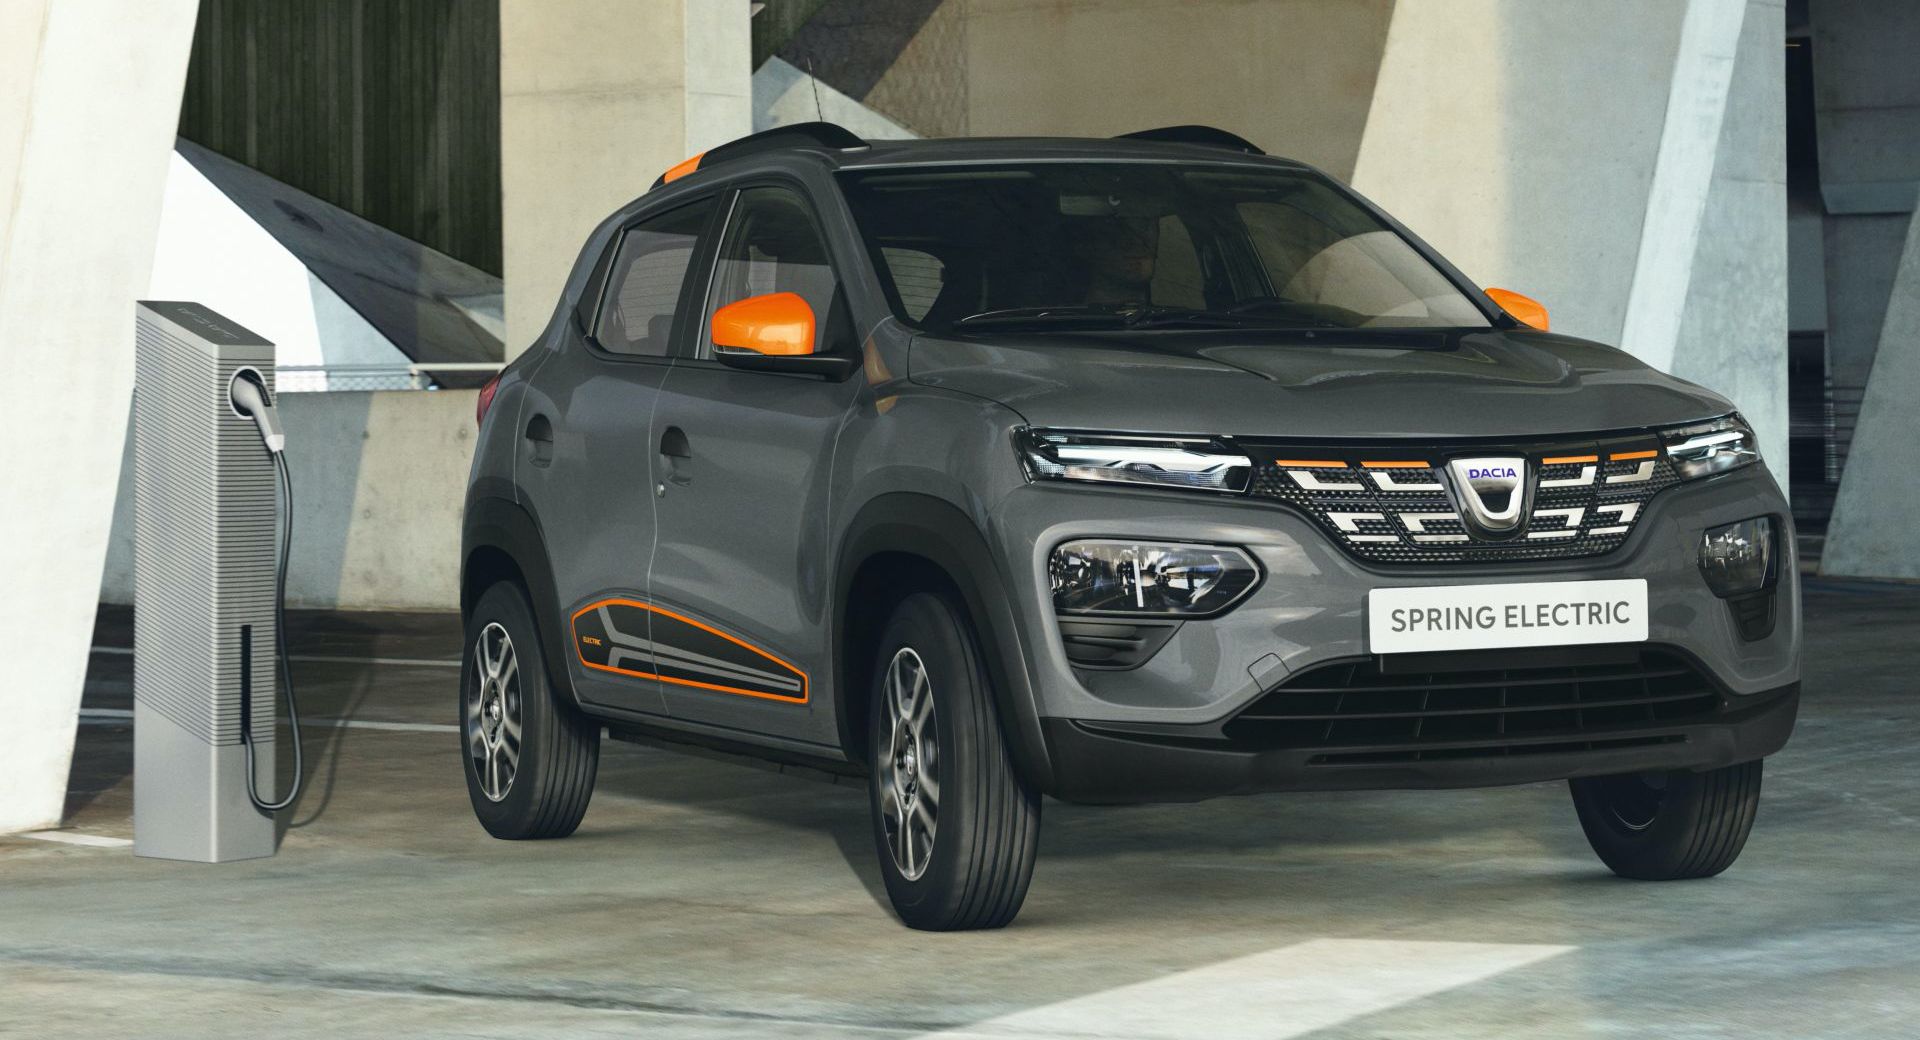 https://www.carscoops.com/wp-content/uploads/2020/10/2021-Dacia-Spring-Electric-0-1.jpg